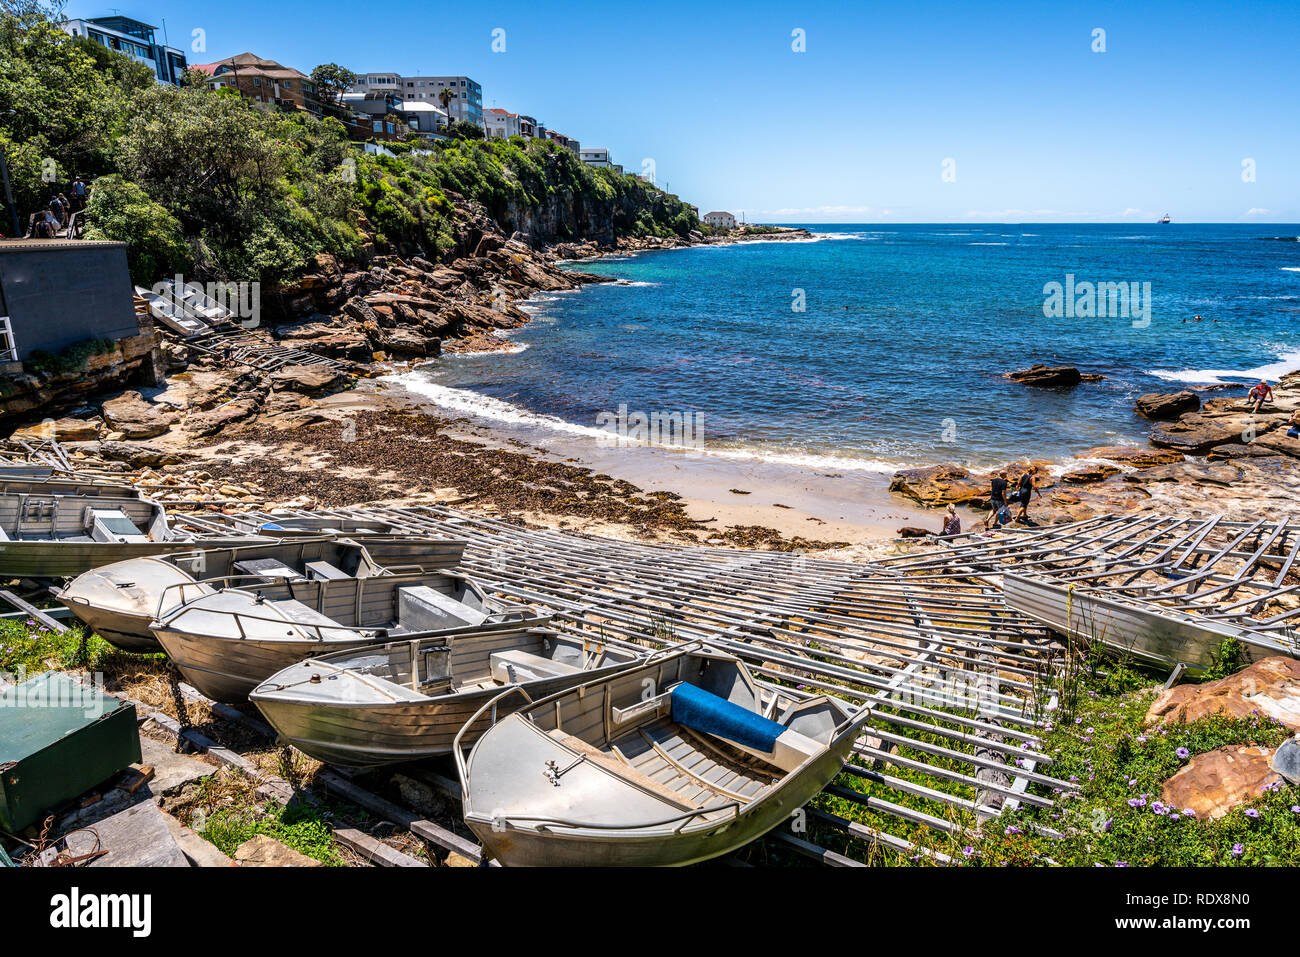 Gordon's Bay view with small boats on the shore during Bondi to Coogee coastal walk in Sydney NSW Australia Stock Photo